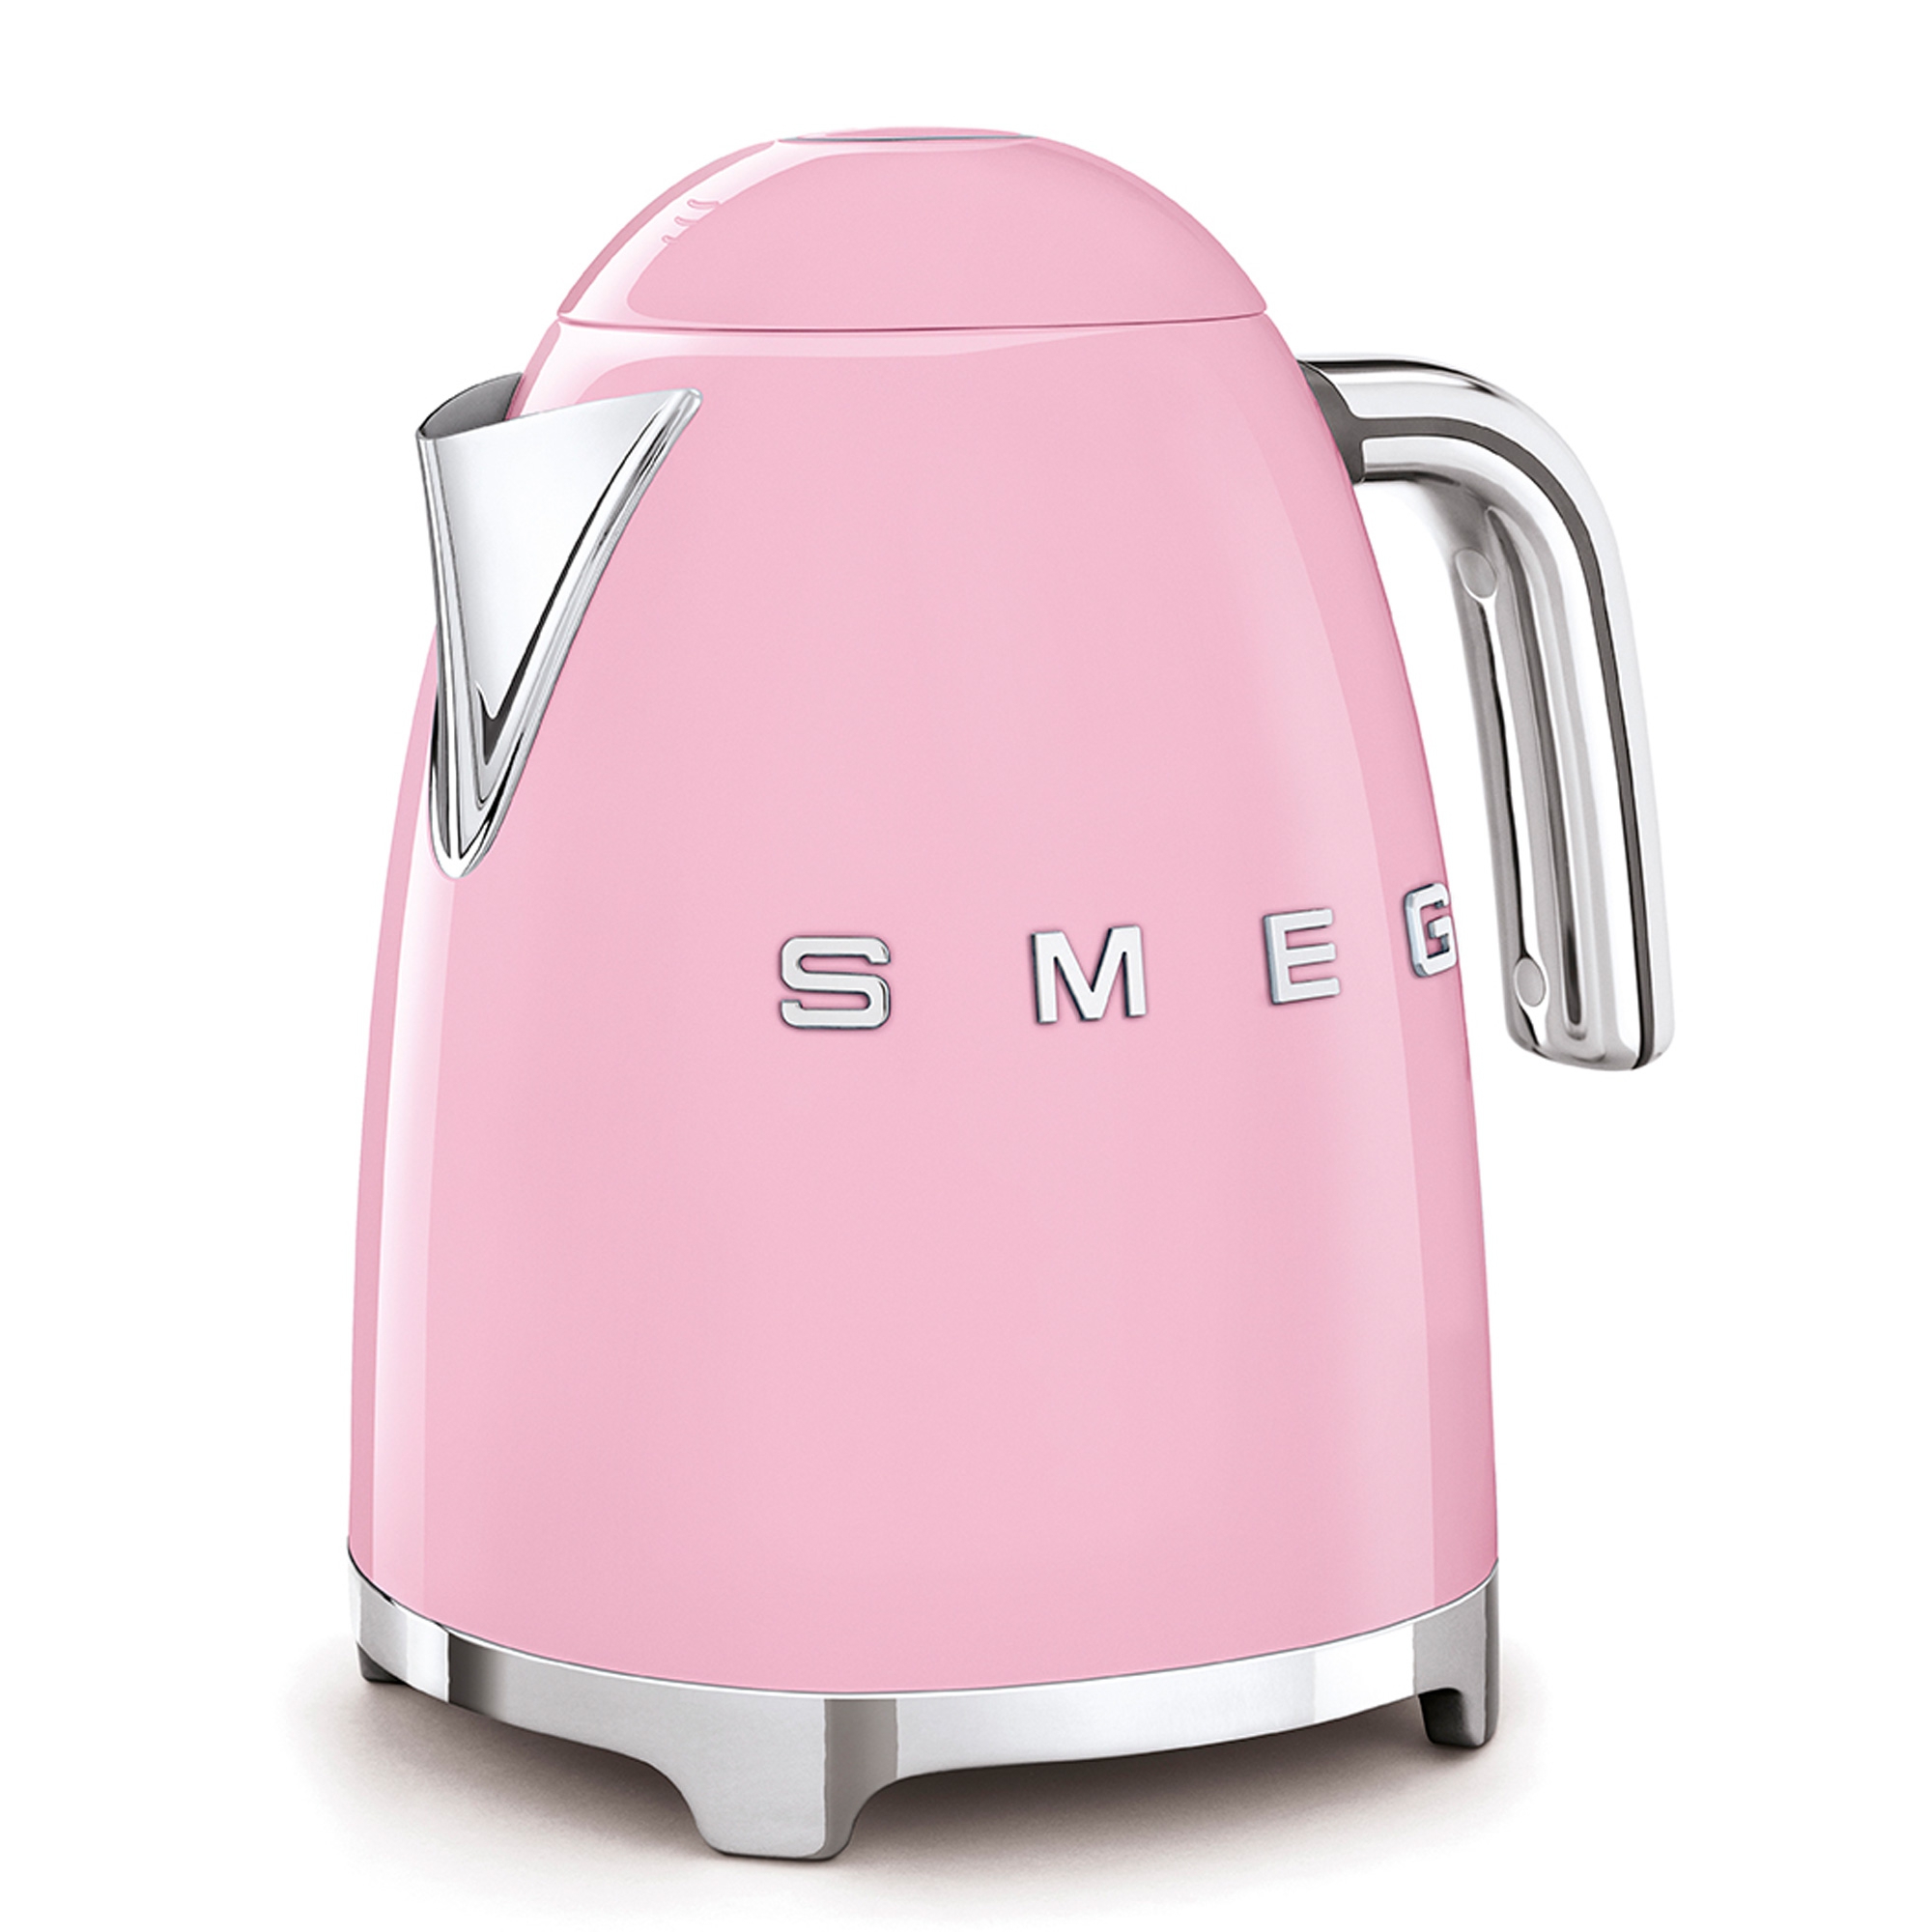 Smeg - 1.7 L kettle - design line style The 50 ° years - pink